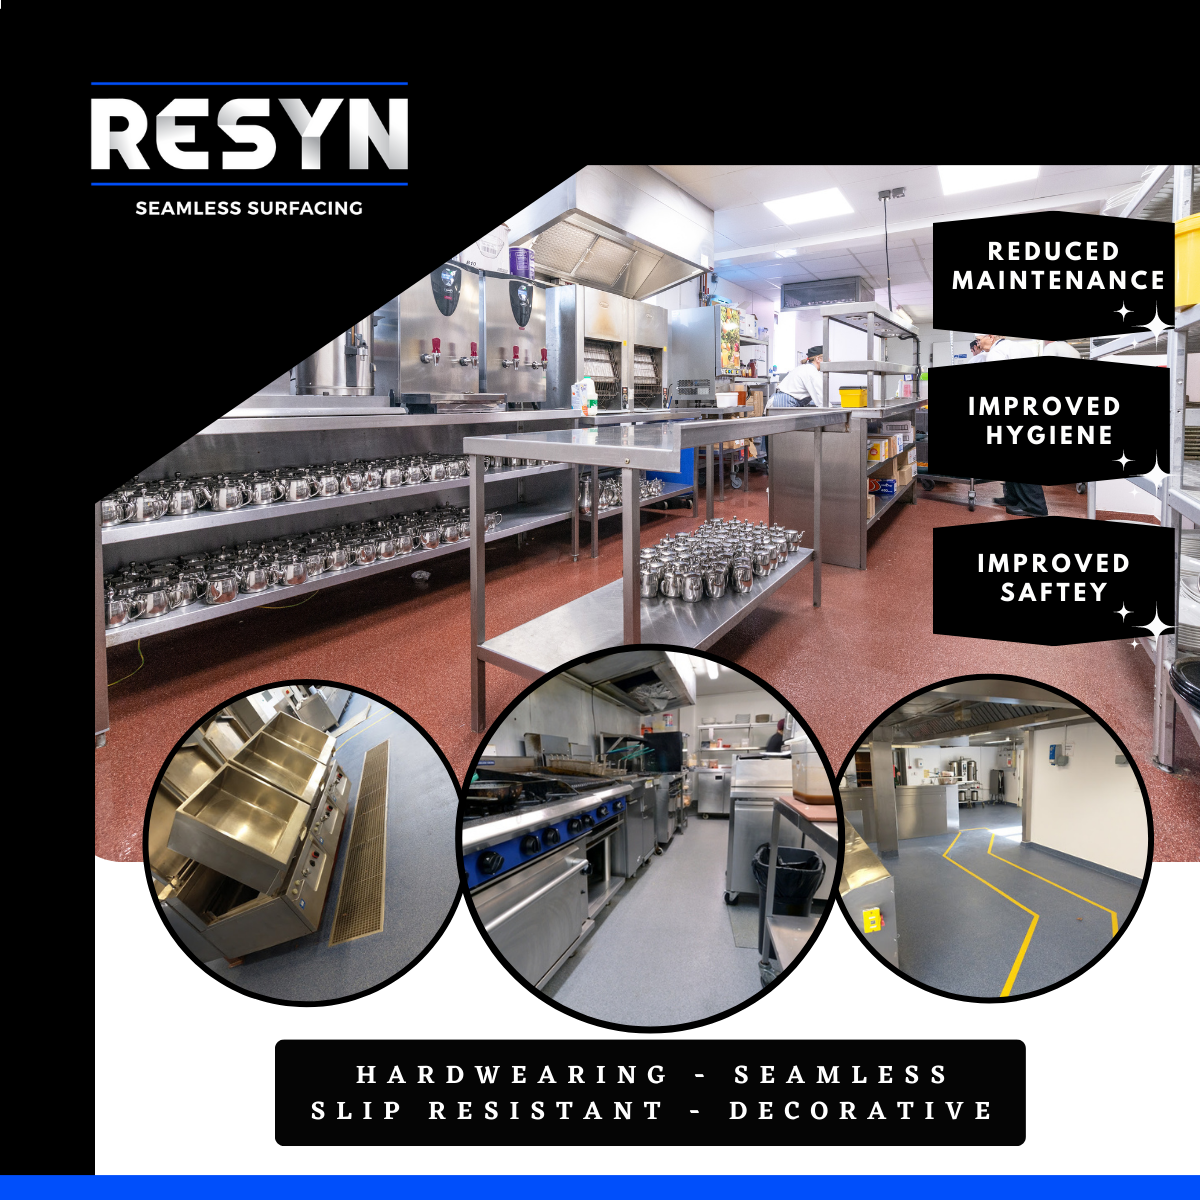 Hardwearing kitchen flooring by RESYN and resin floors for kitchens